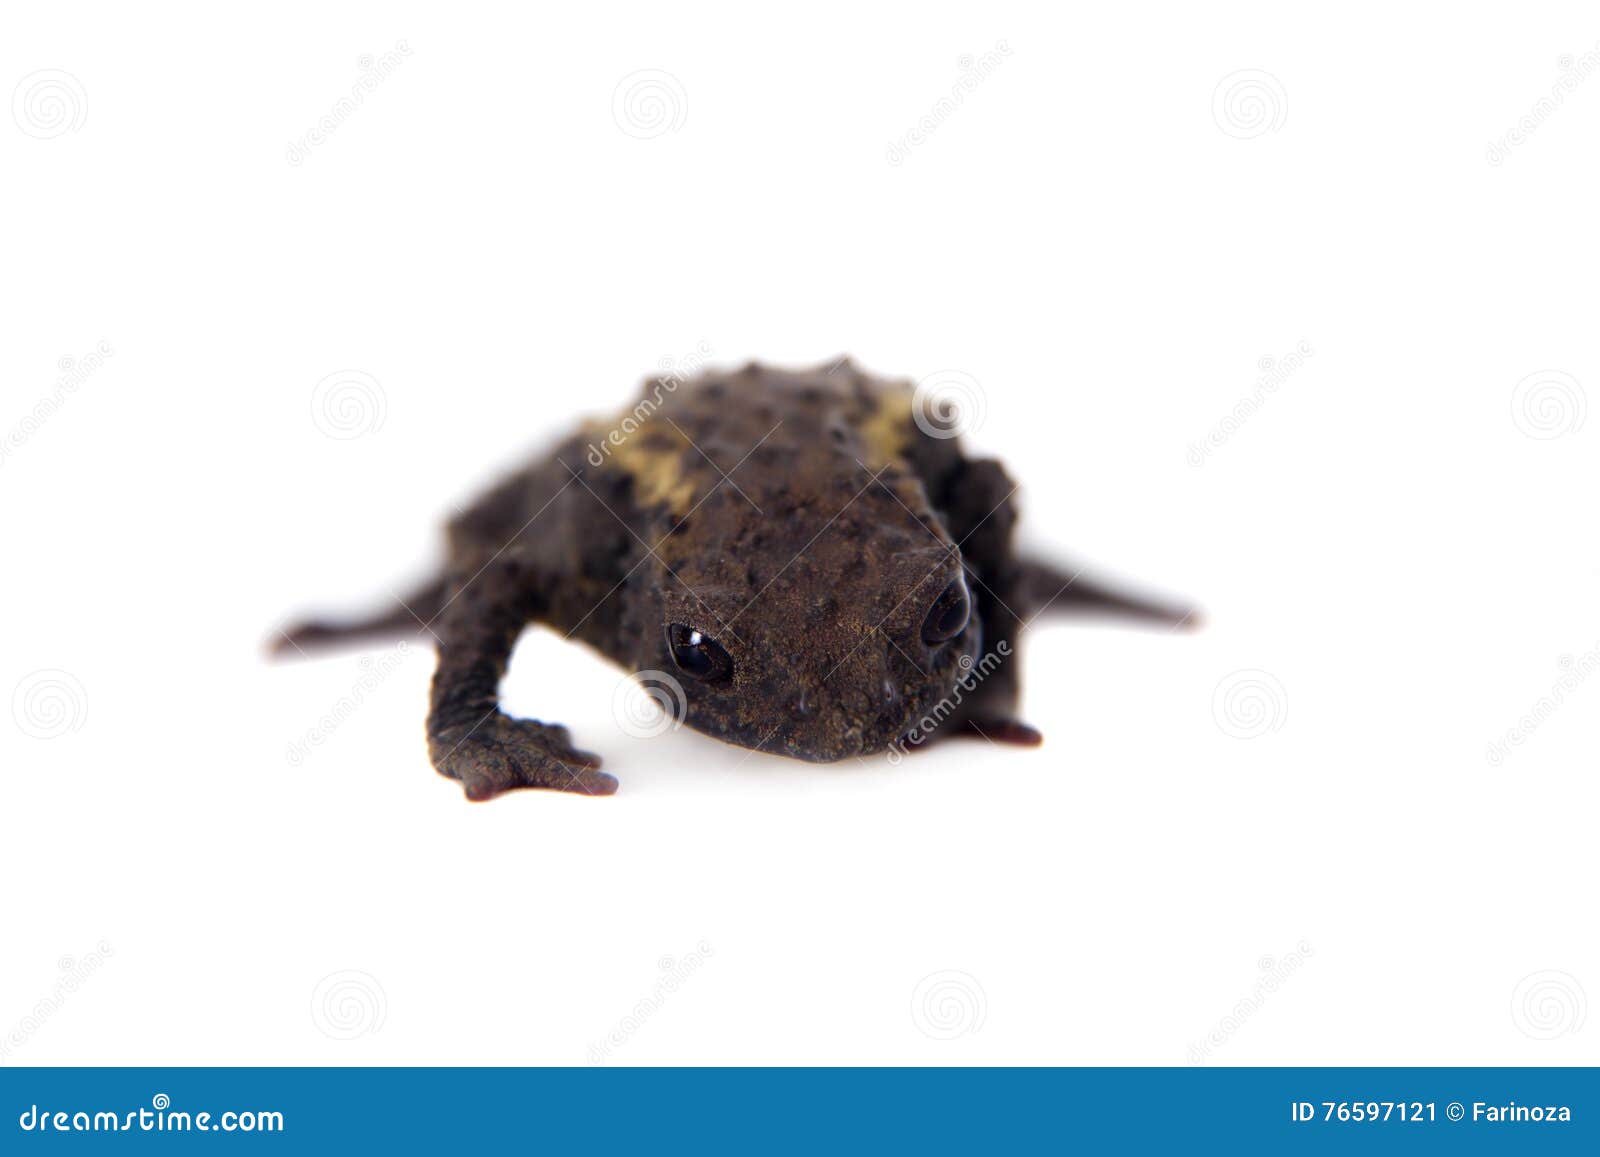 the guacamayo plump toad on white